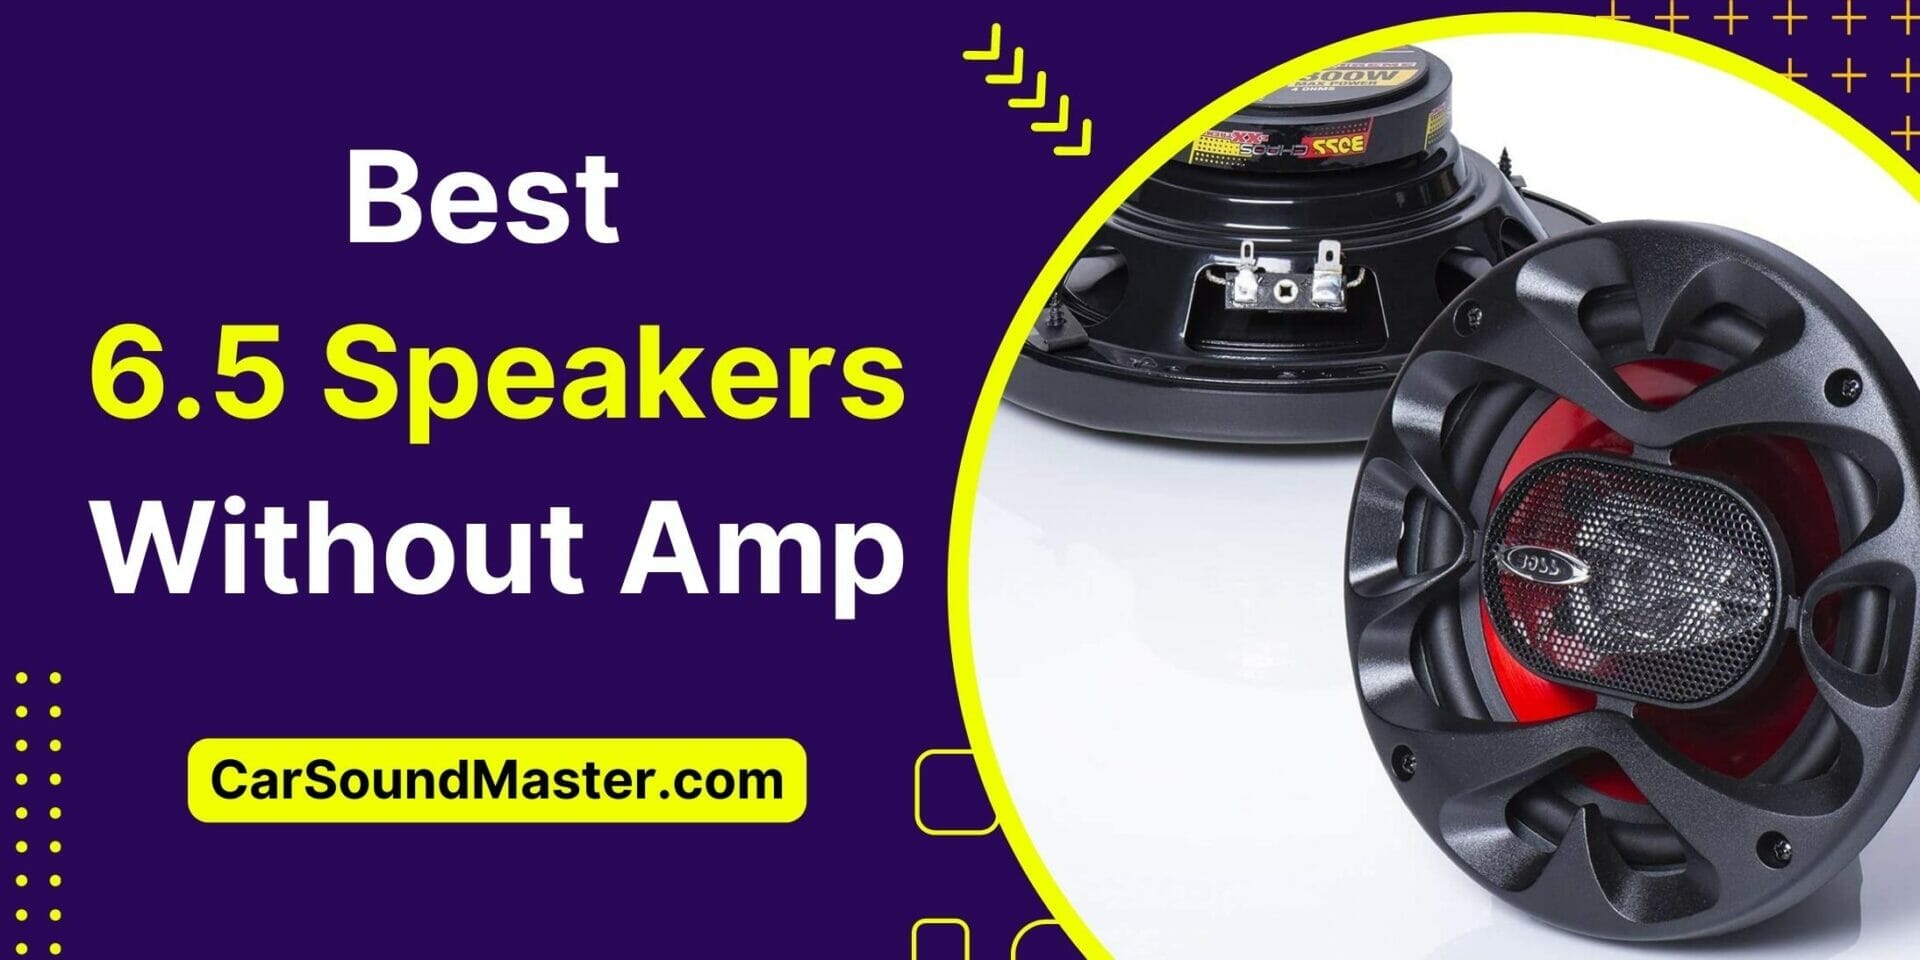 Best 6.5 Speakers Without Amp